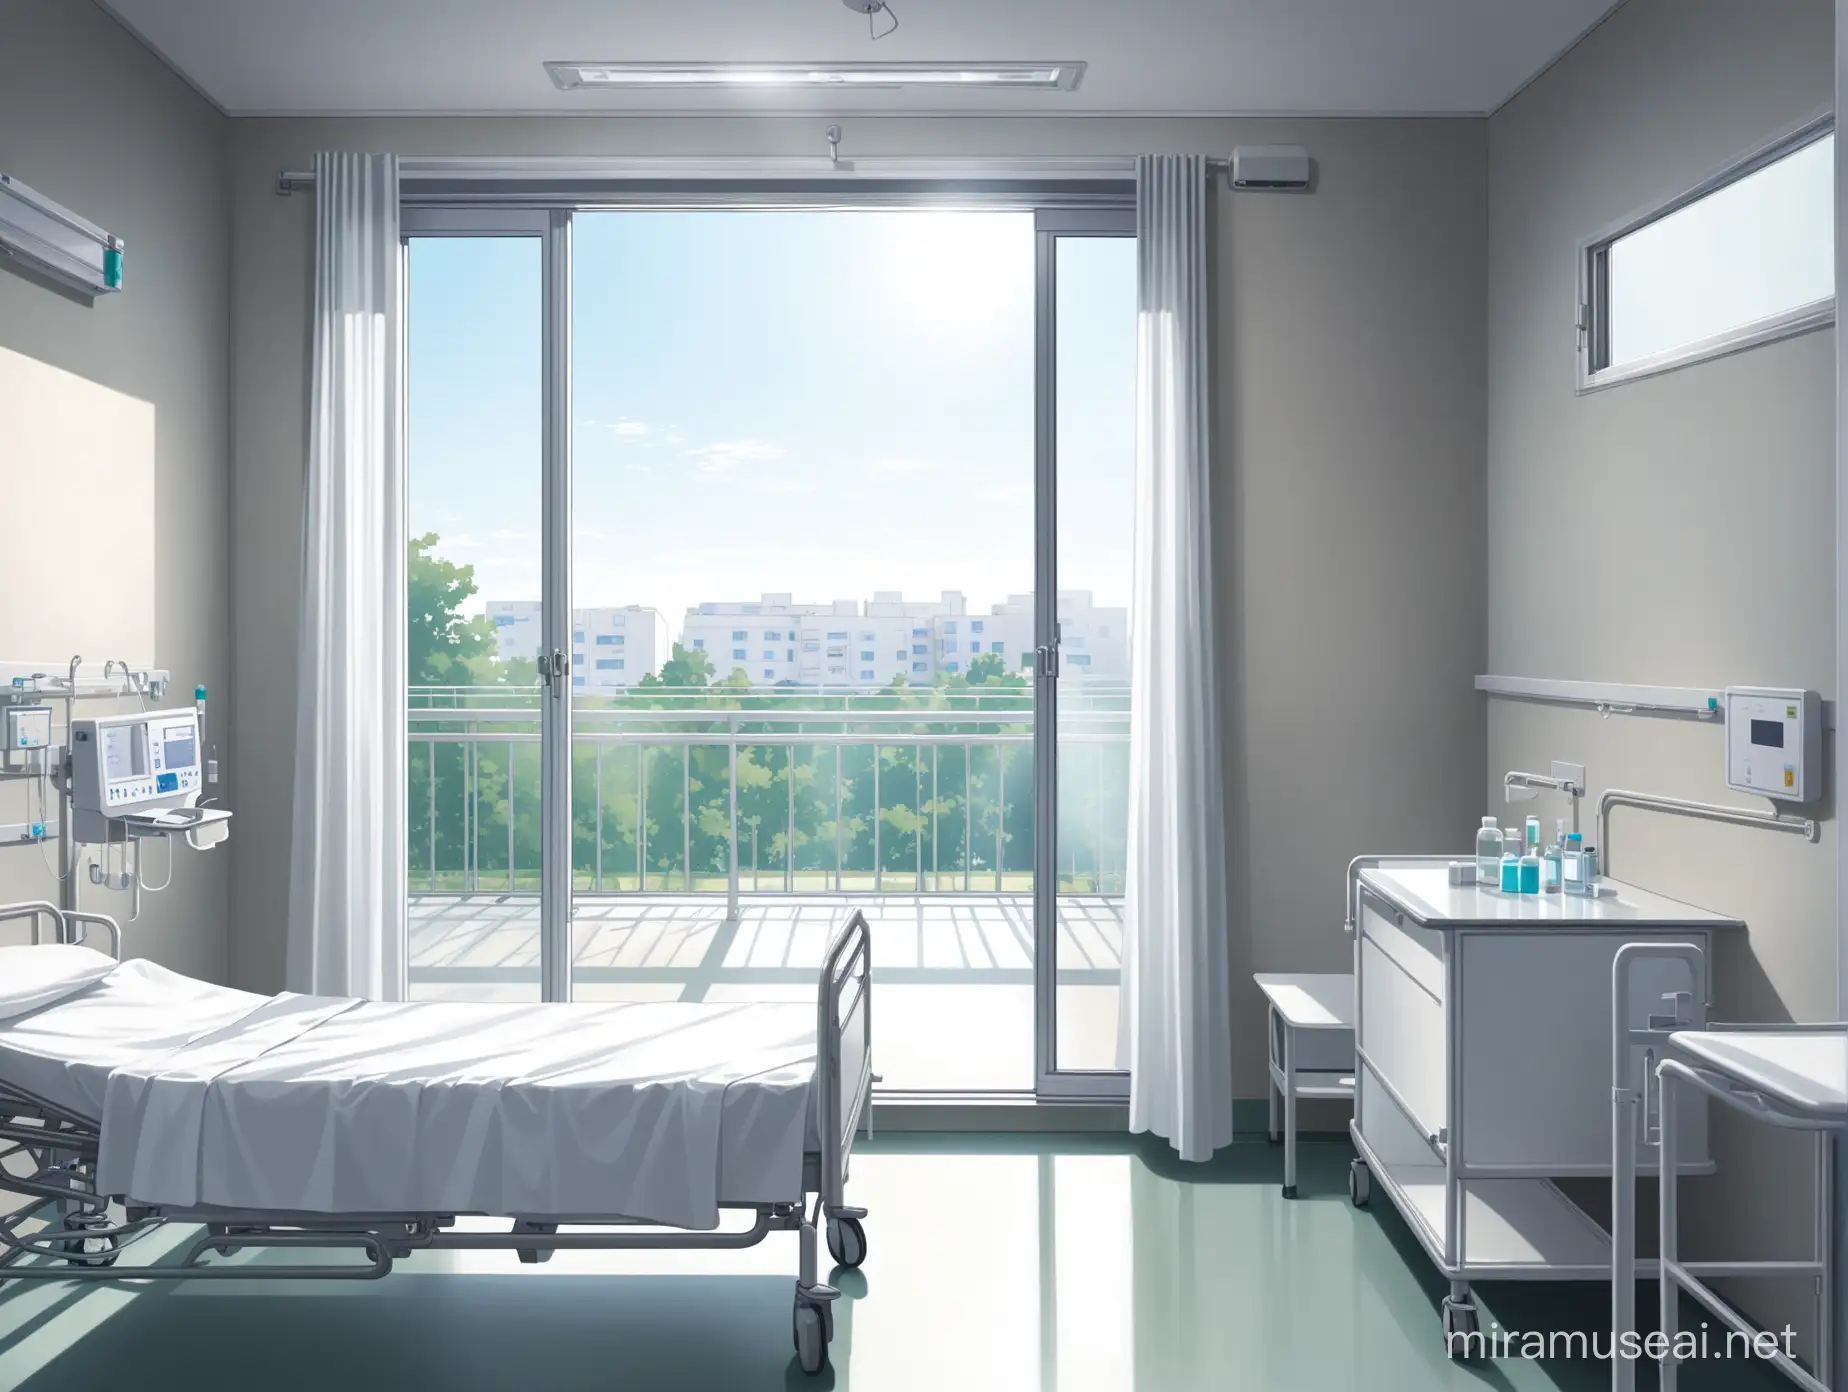 Hospital Ward with Open Window and Silver Medicine on Bedside Table